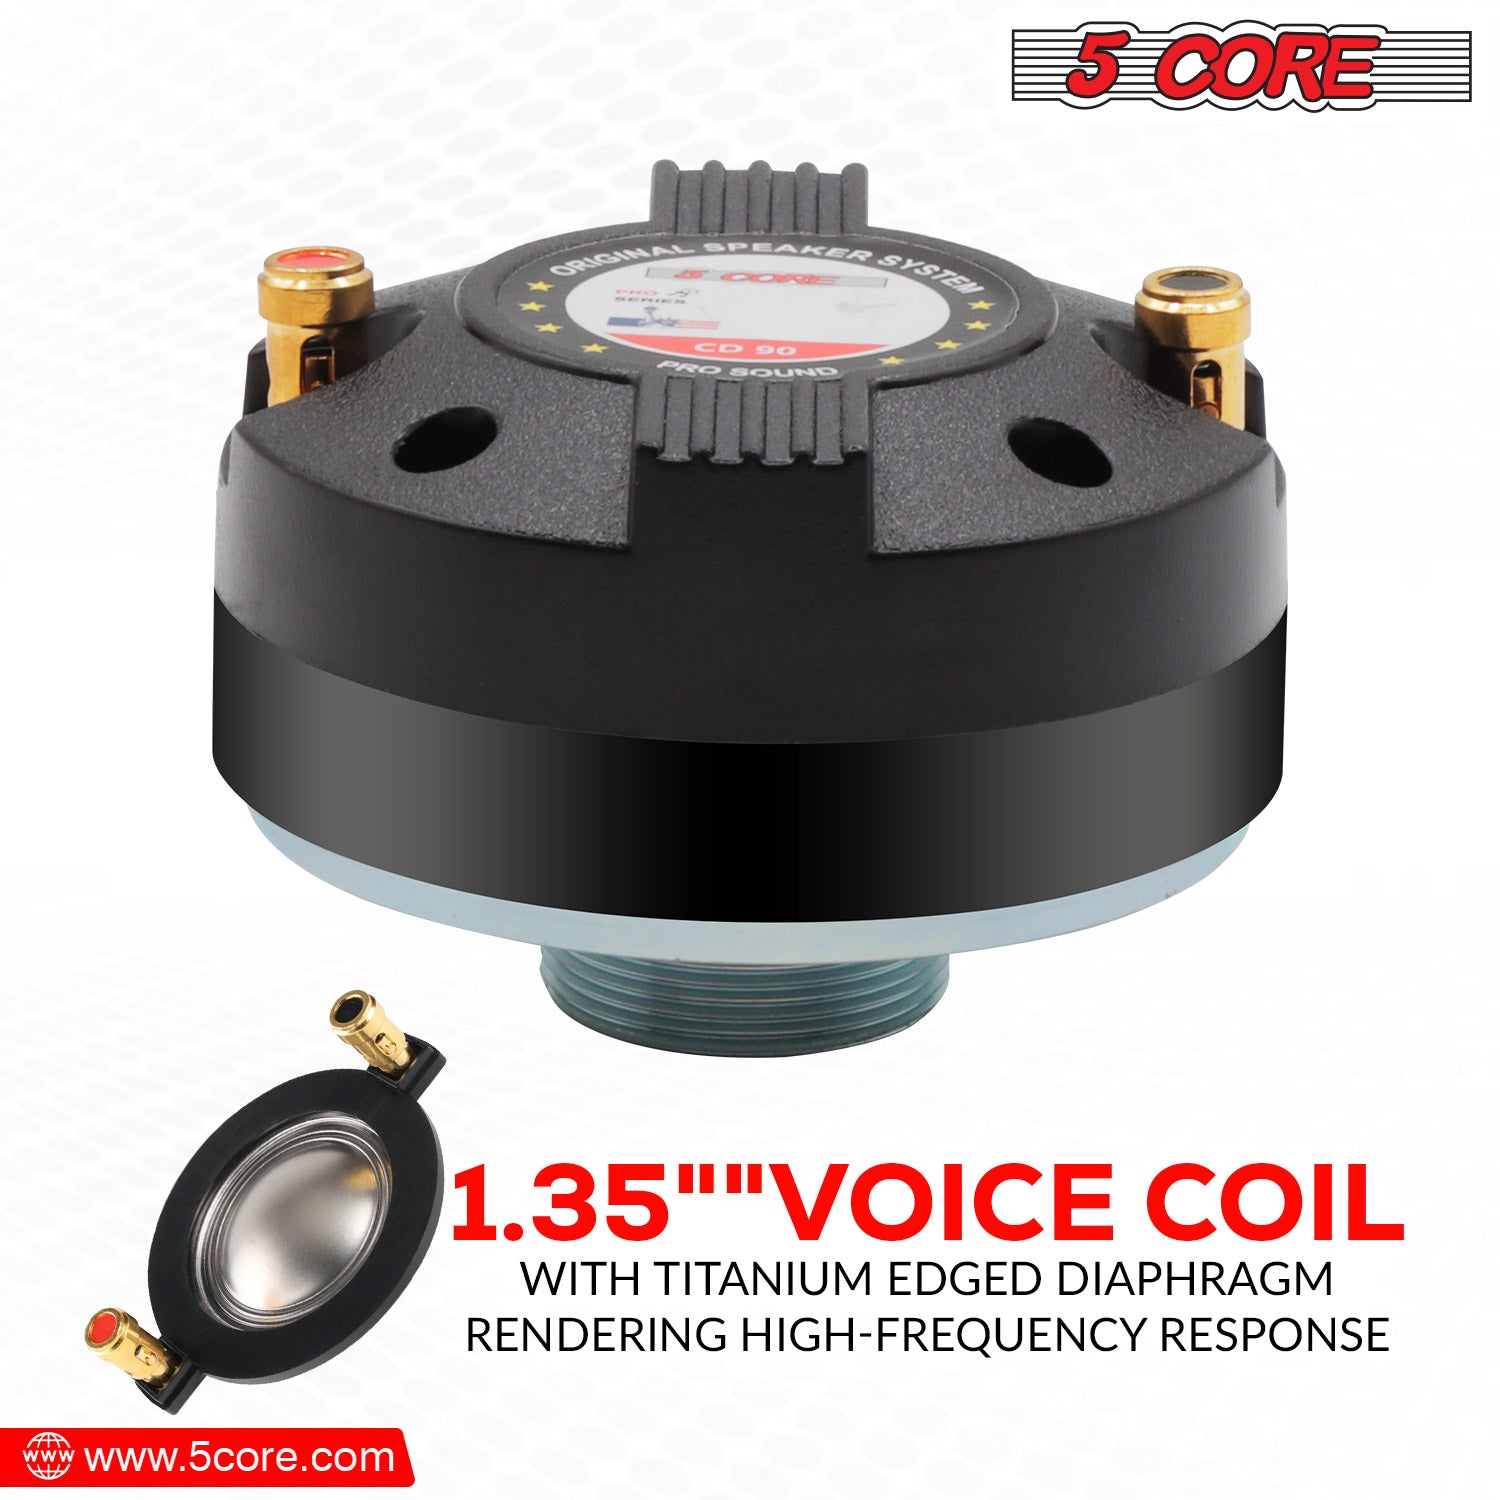 5 CORE Compression Driver Titanium Voice Coil 200W Max Audio Horn Speaker Tweeter System Extremely Loud